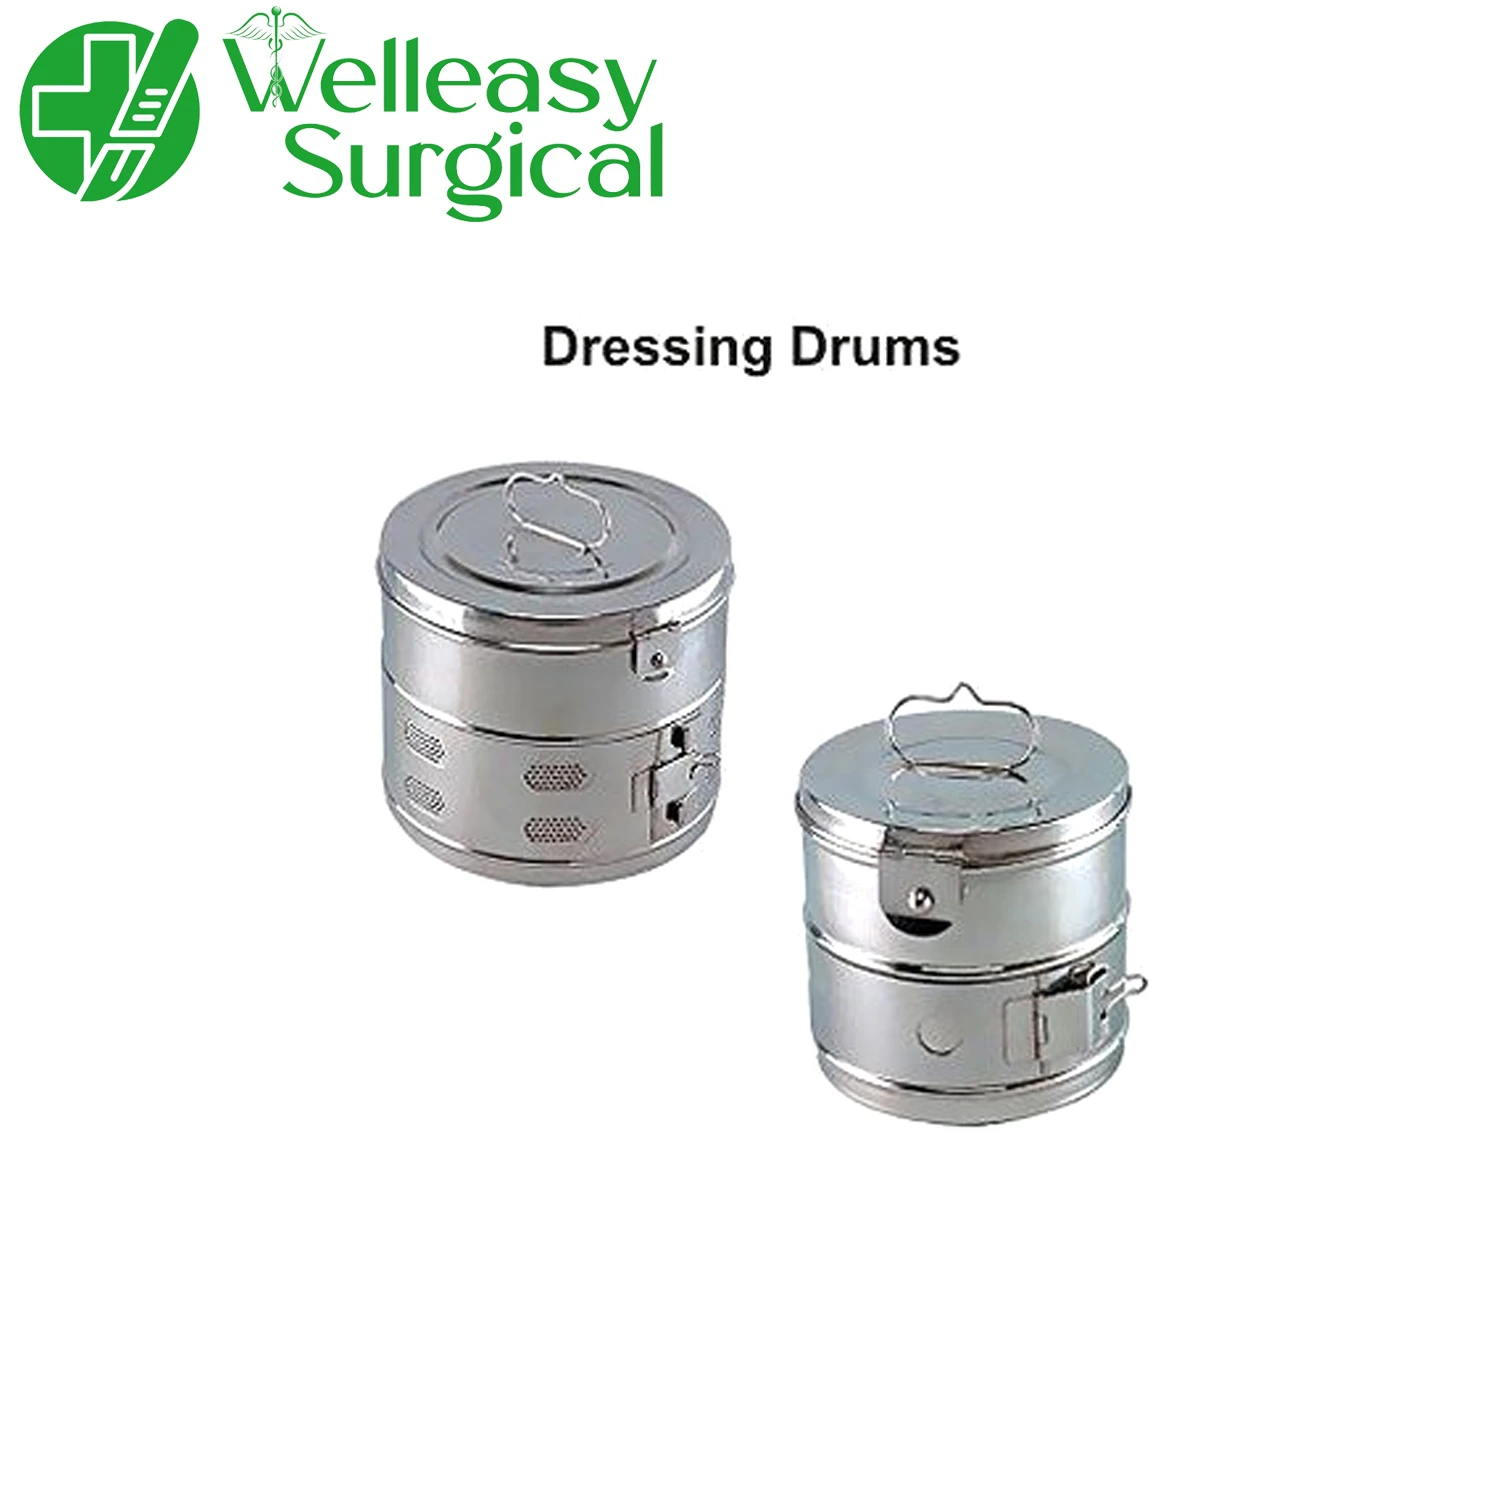 Hospital Medical Use Dressing Drum 6 x 4 inches Surgical Medical Instruments WE-H-0022